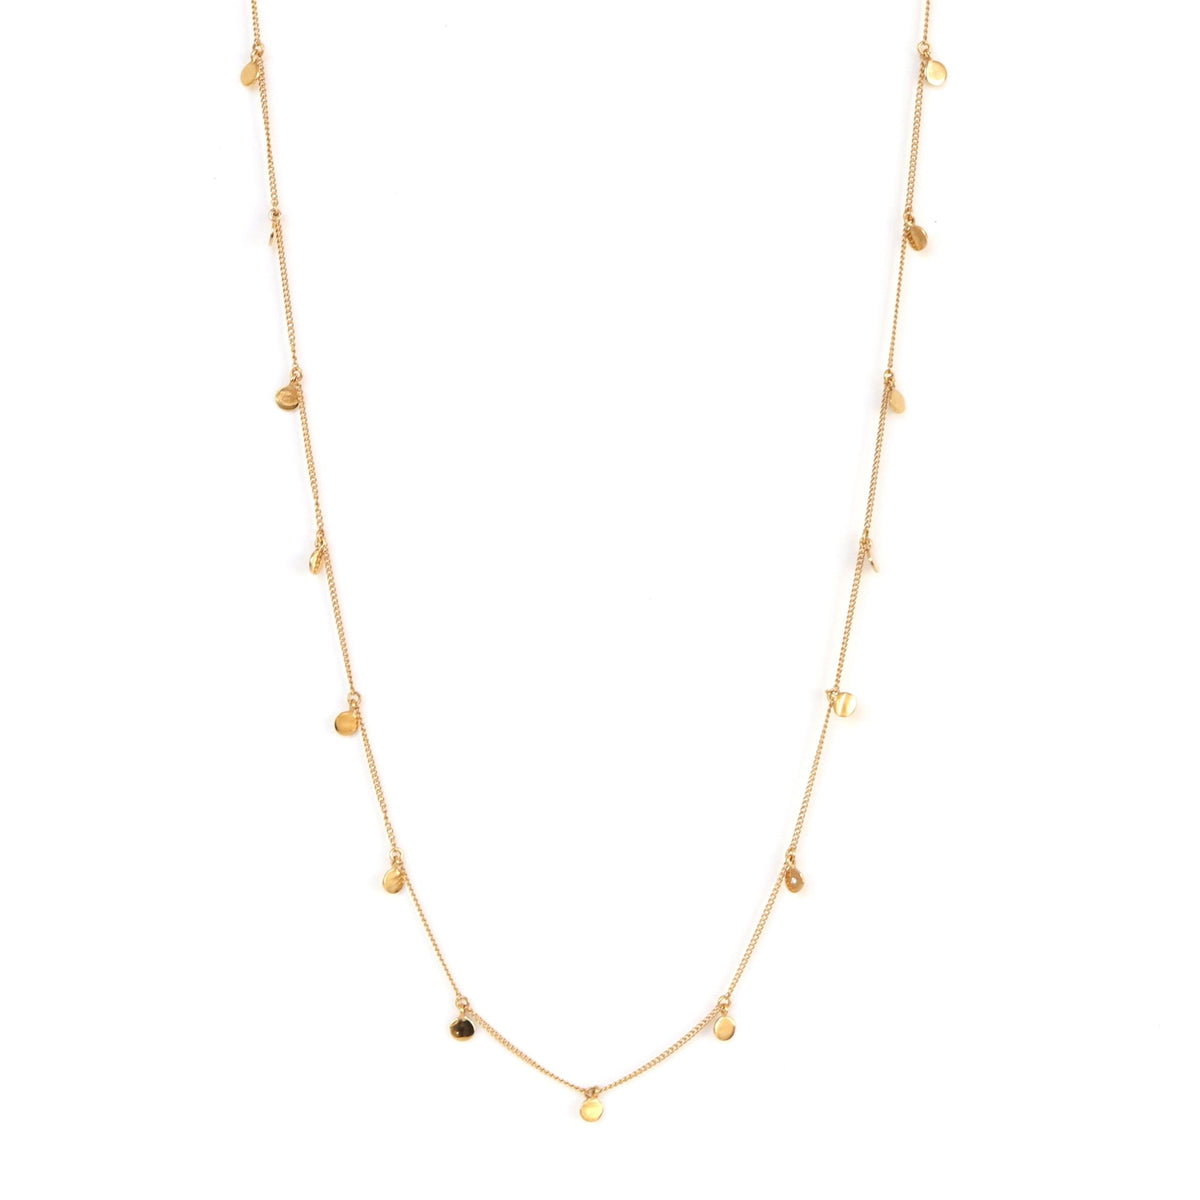 POISE LONG DISK NECKLACE - GOLD - SO PRETTY CARA COTTER